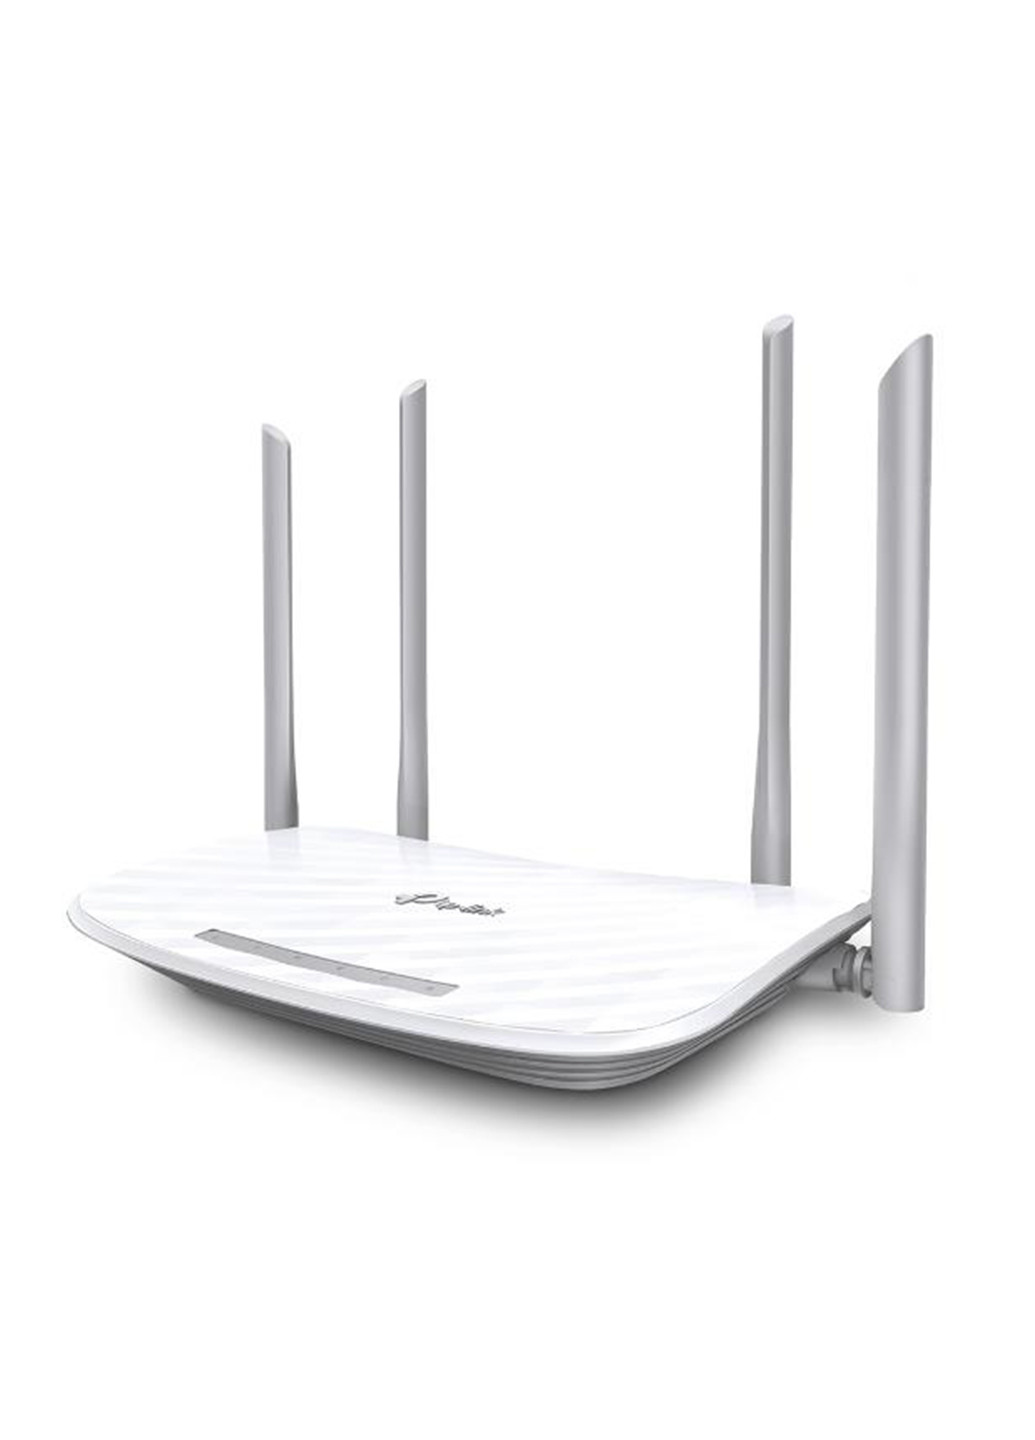 Маршрутизатор ARCHER A5 TP-Link маршрутизатор tp-link archer a5 (135817404)